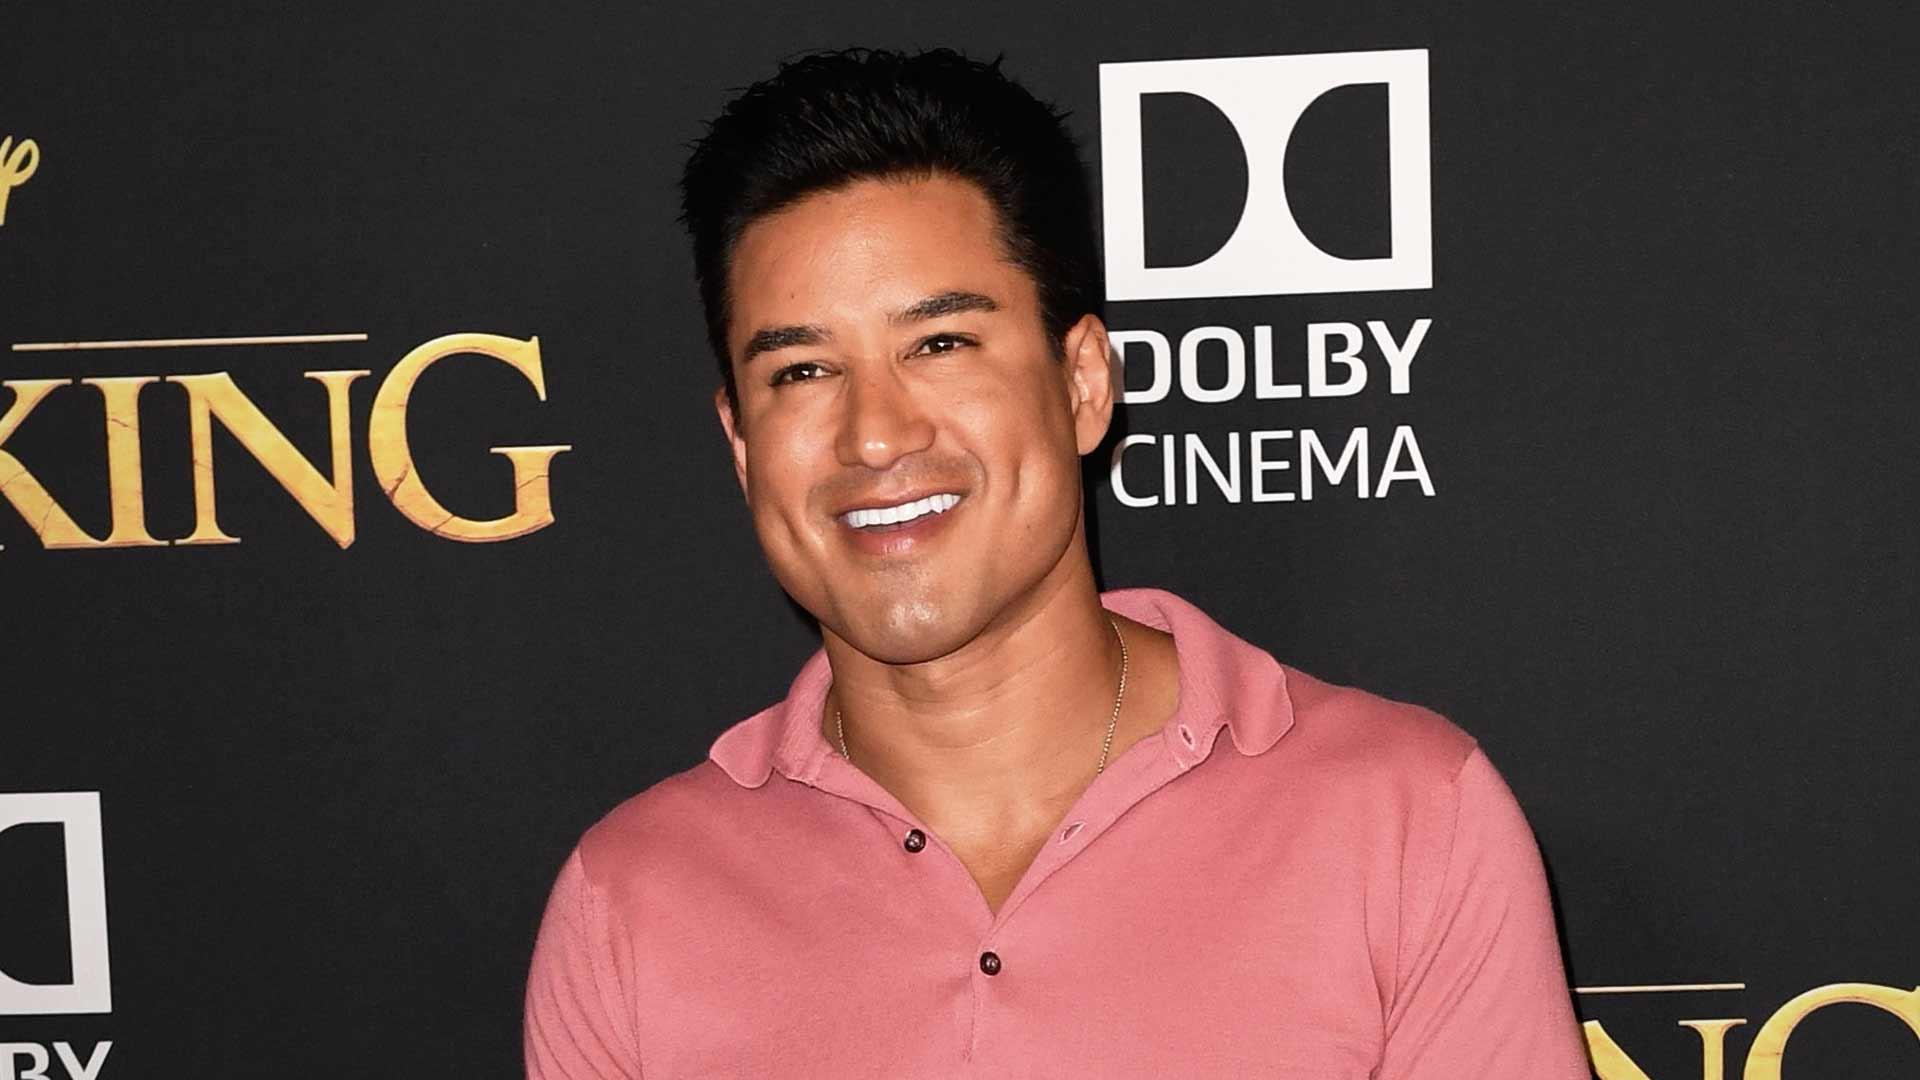 Mario Lopez Named New ‘Access Hollywood’ Host, Signs Overall Deal With NBC